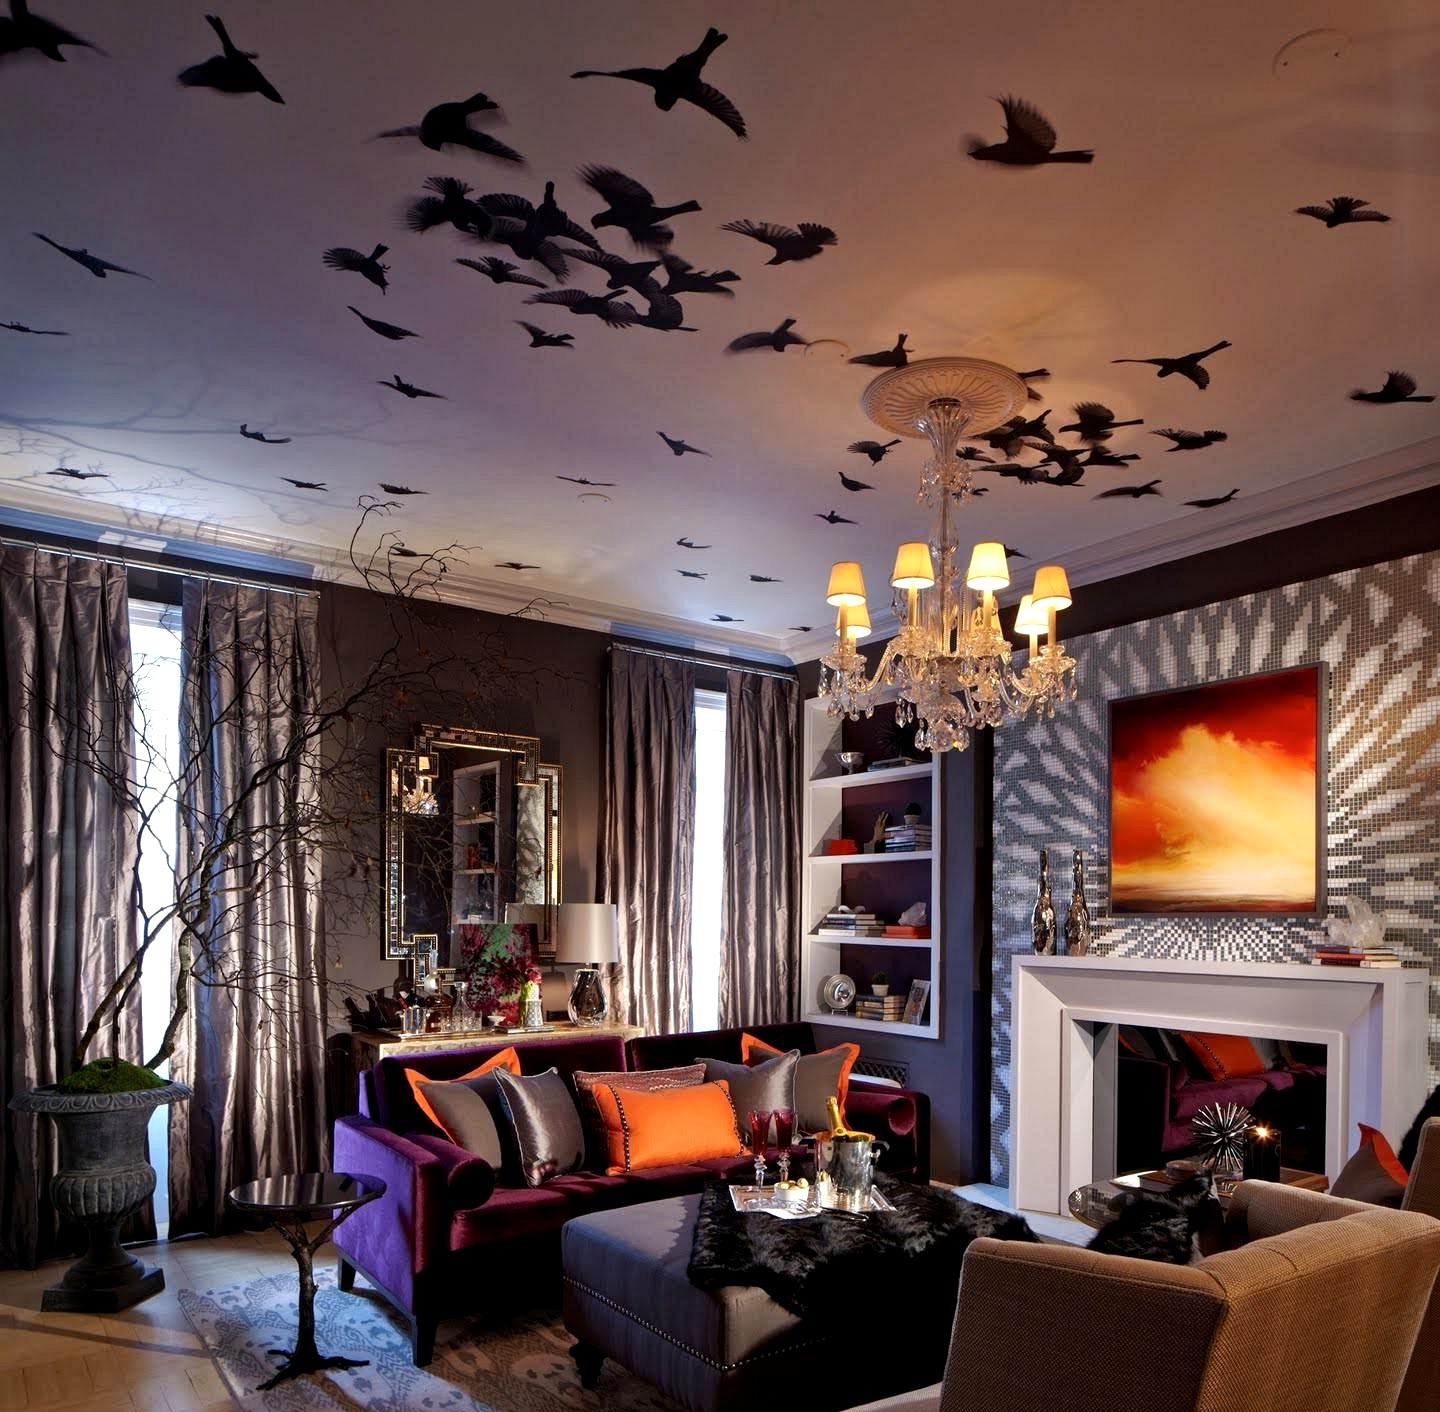 Your Halloween Celebration will be More Fun with these 10 Spooky Living Room Decor Ideas